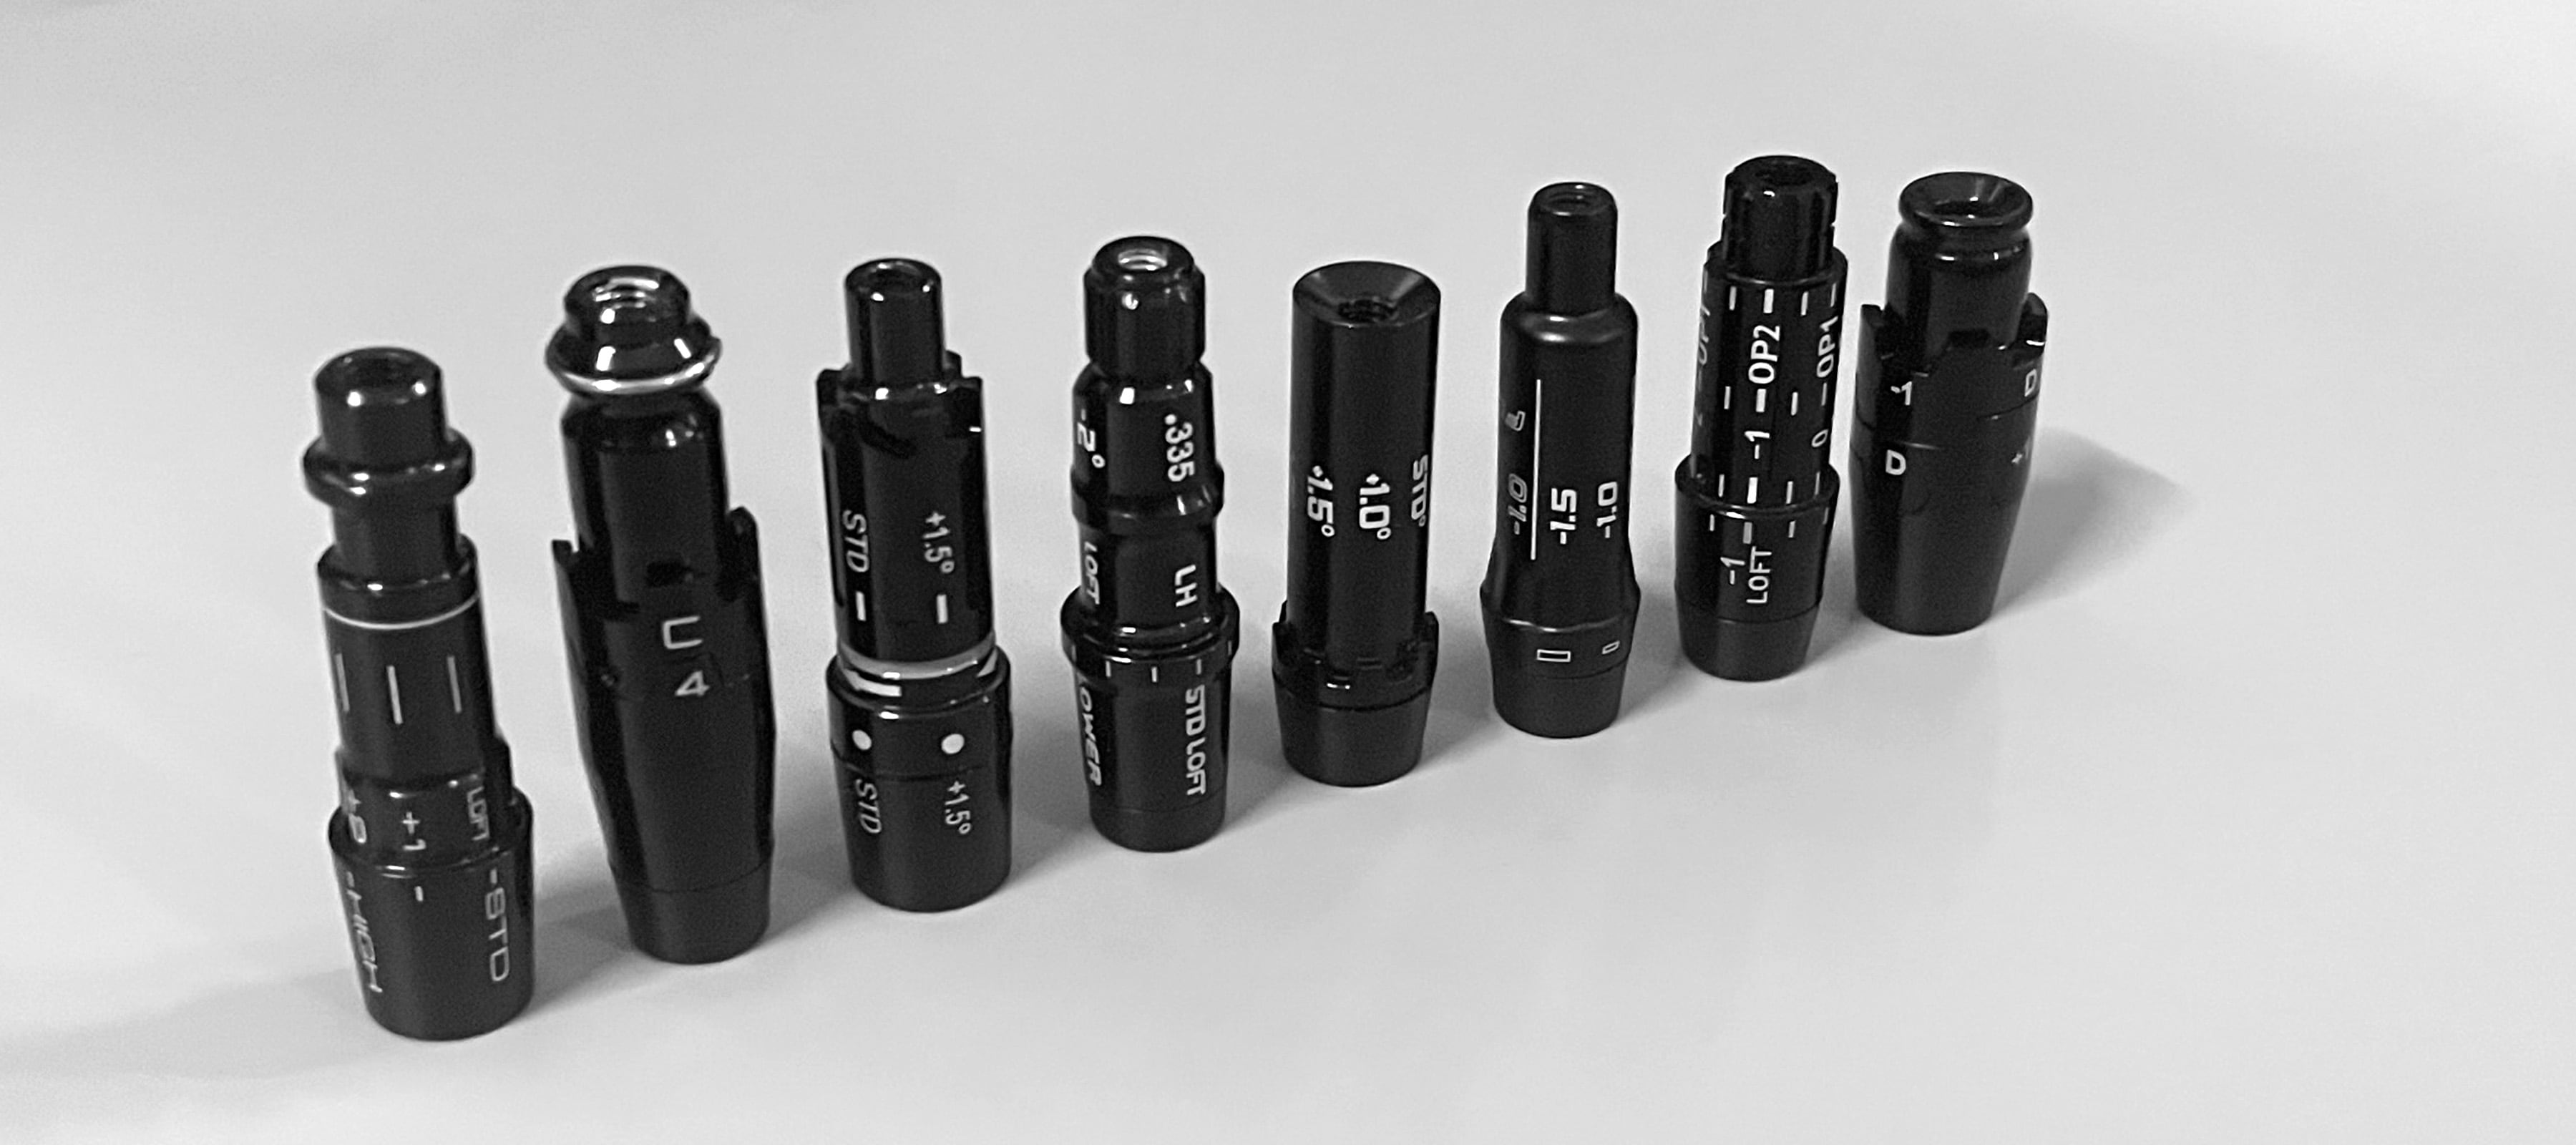 Shaft Connect Golf Shaft Adapters